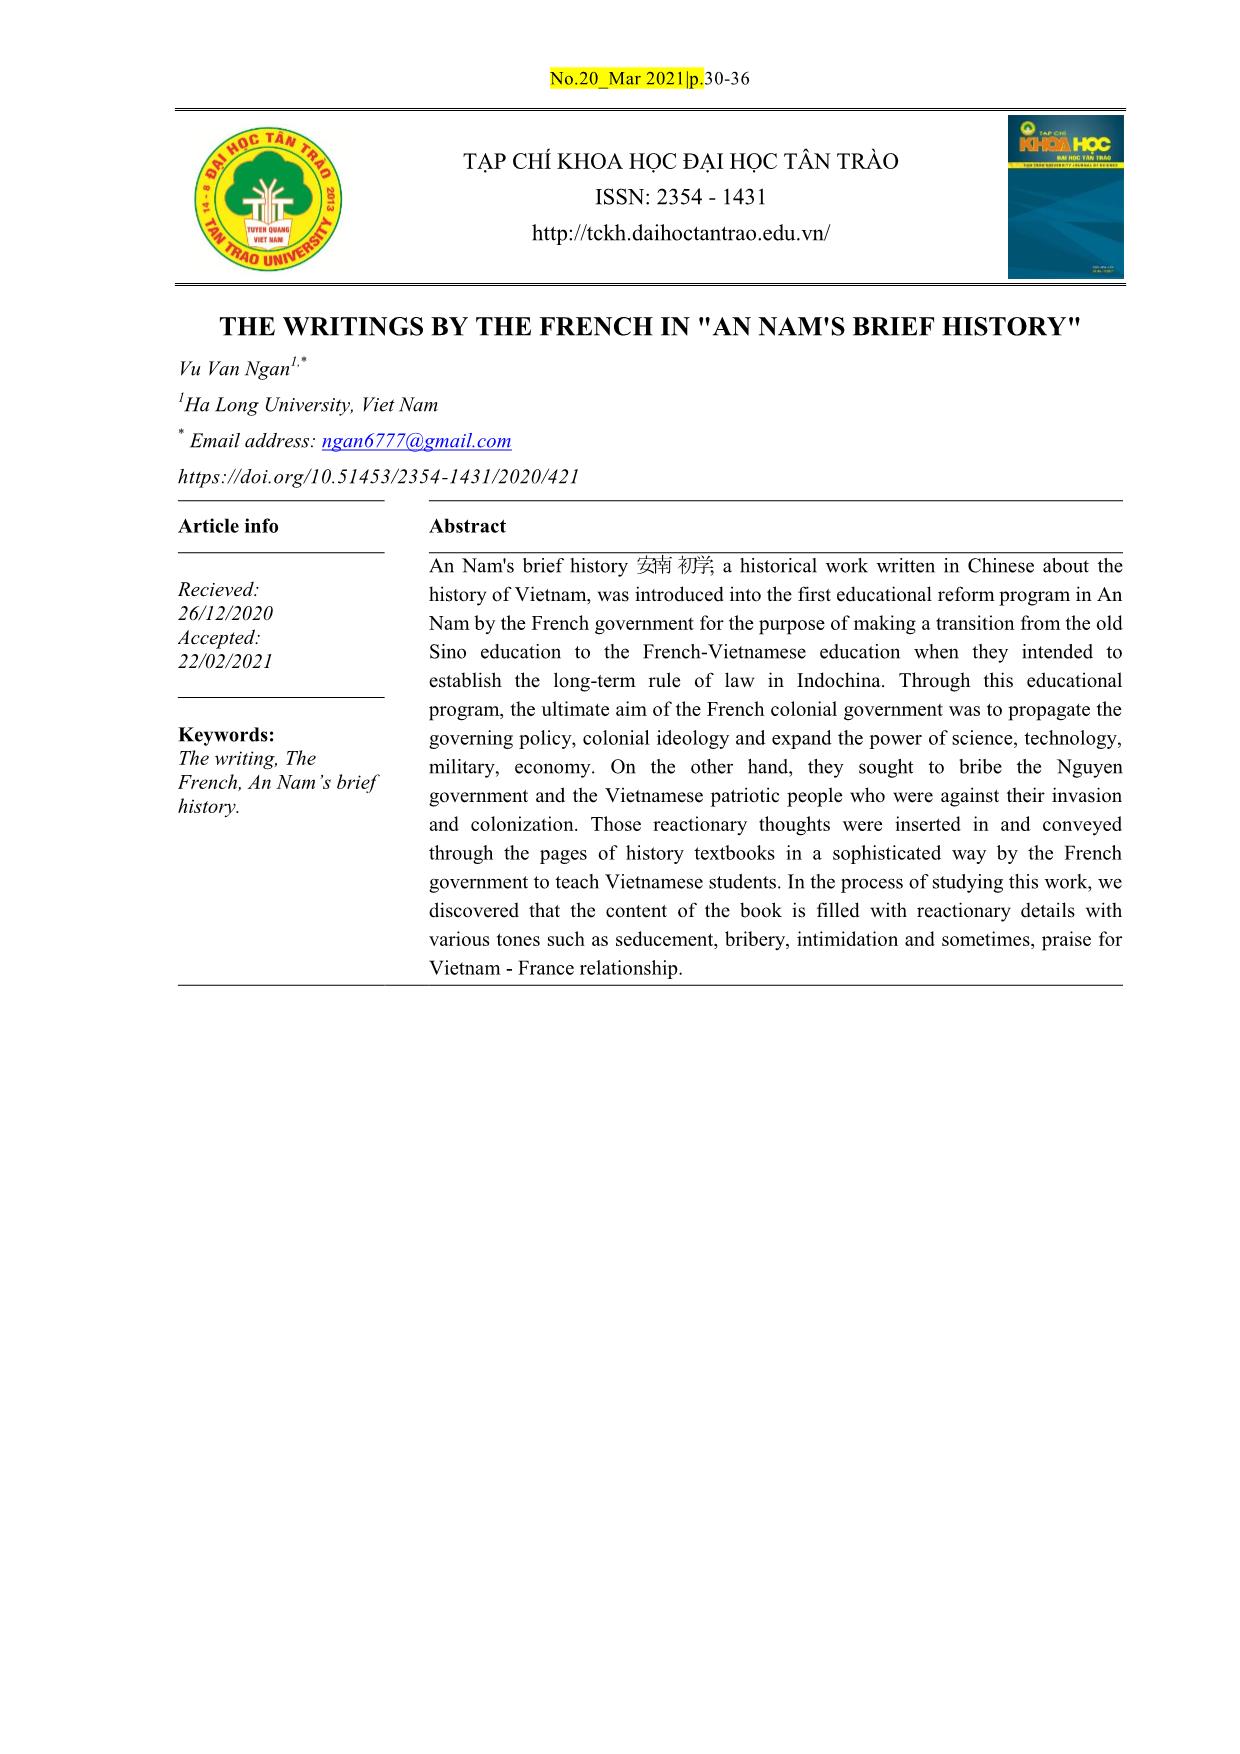 The writings by the French in An Nams brief history trang 1